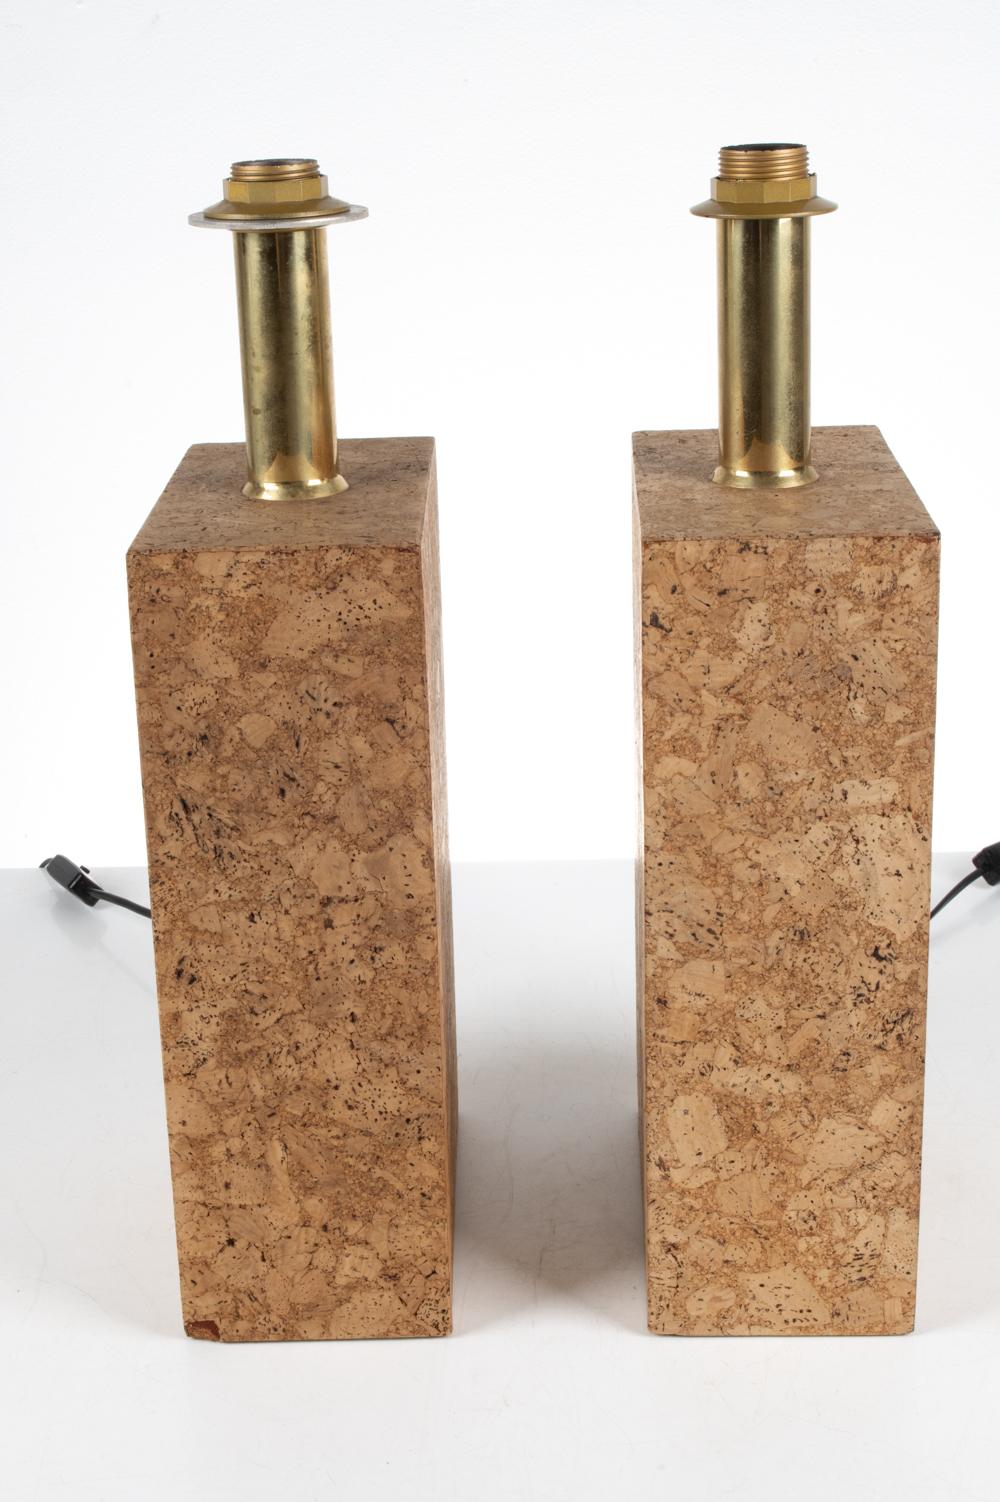 Pair of Cork Monolith Table Lamps in the Stye of Ingo Maurer, c. 1970's For Sale 3